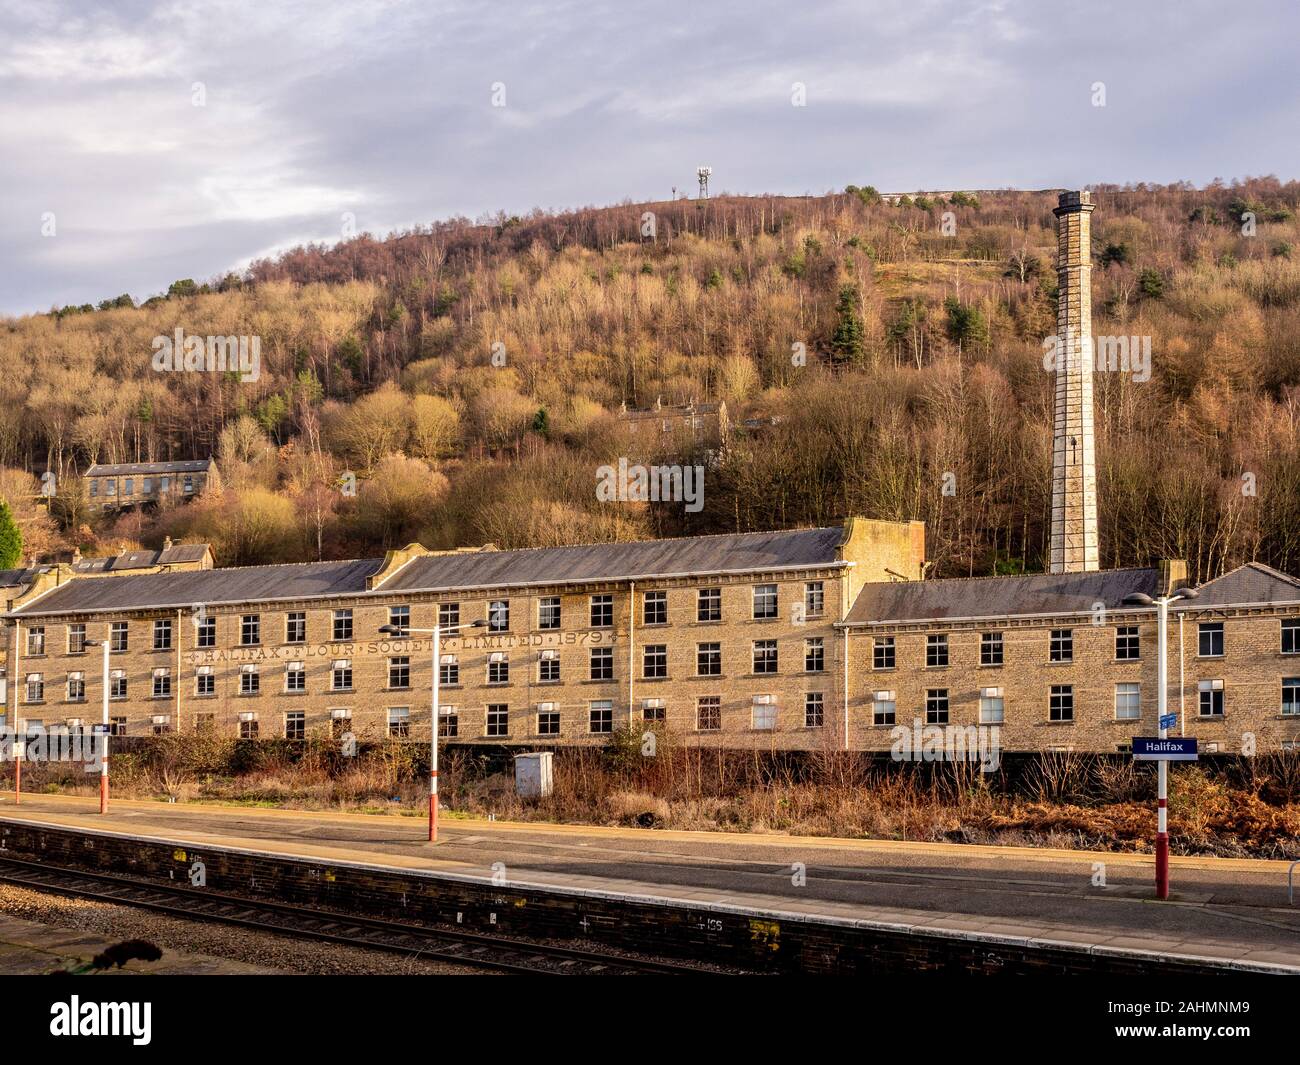 Halifax Flour Society Mill building -  a co-operative mill founded in 1879, Halifax, UK. Halifax train station platform in foreground. Stock Photo